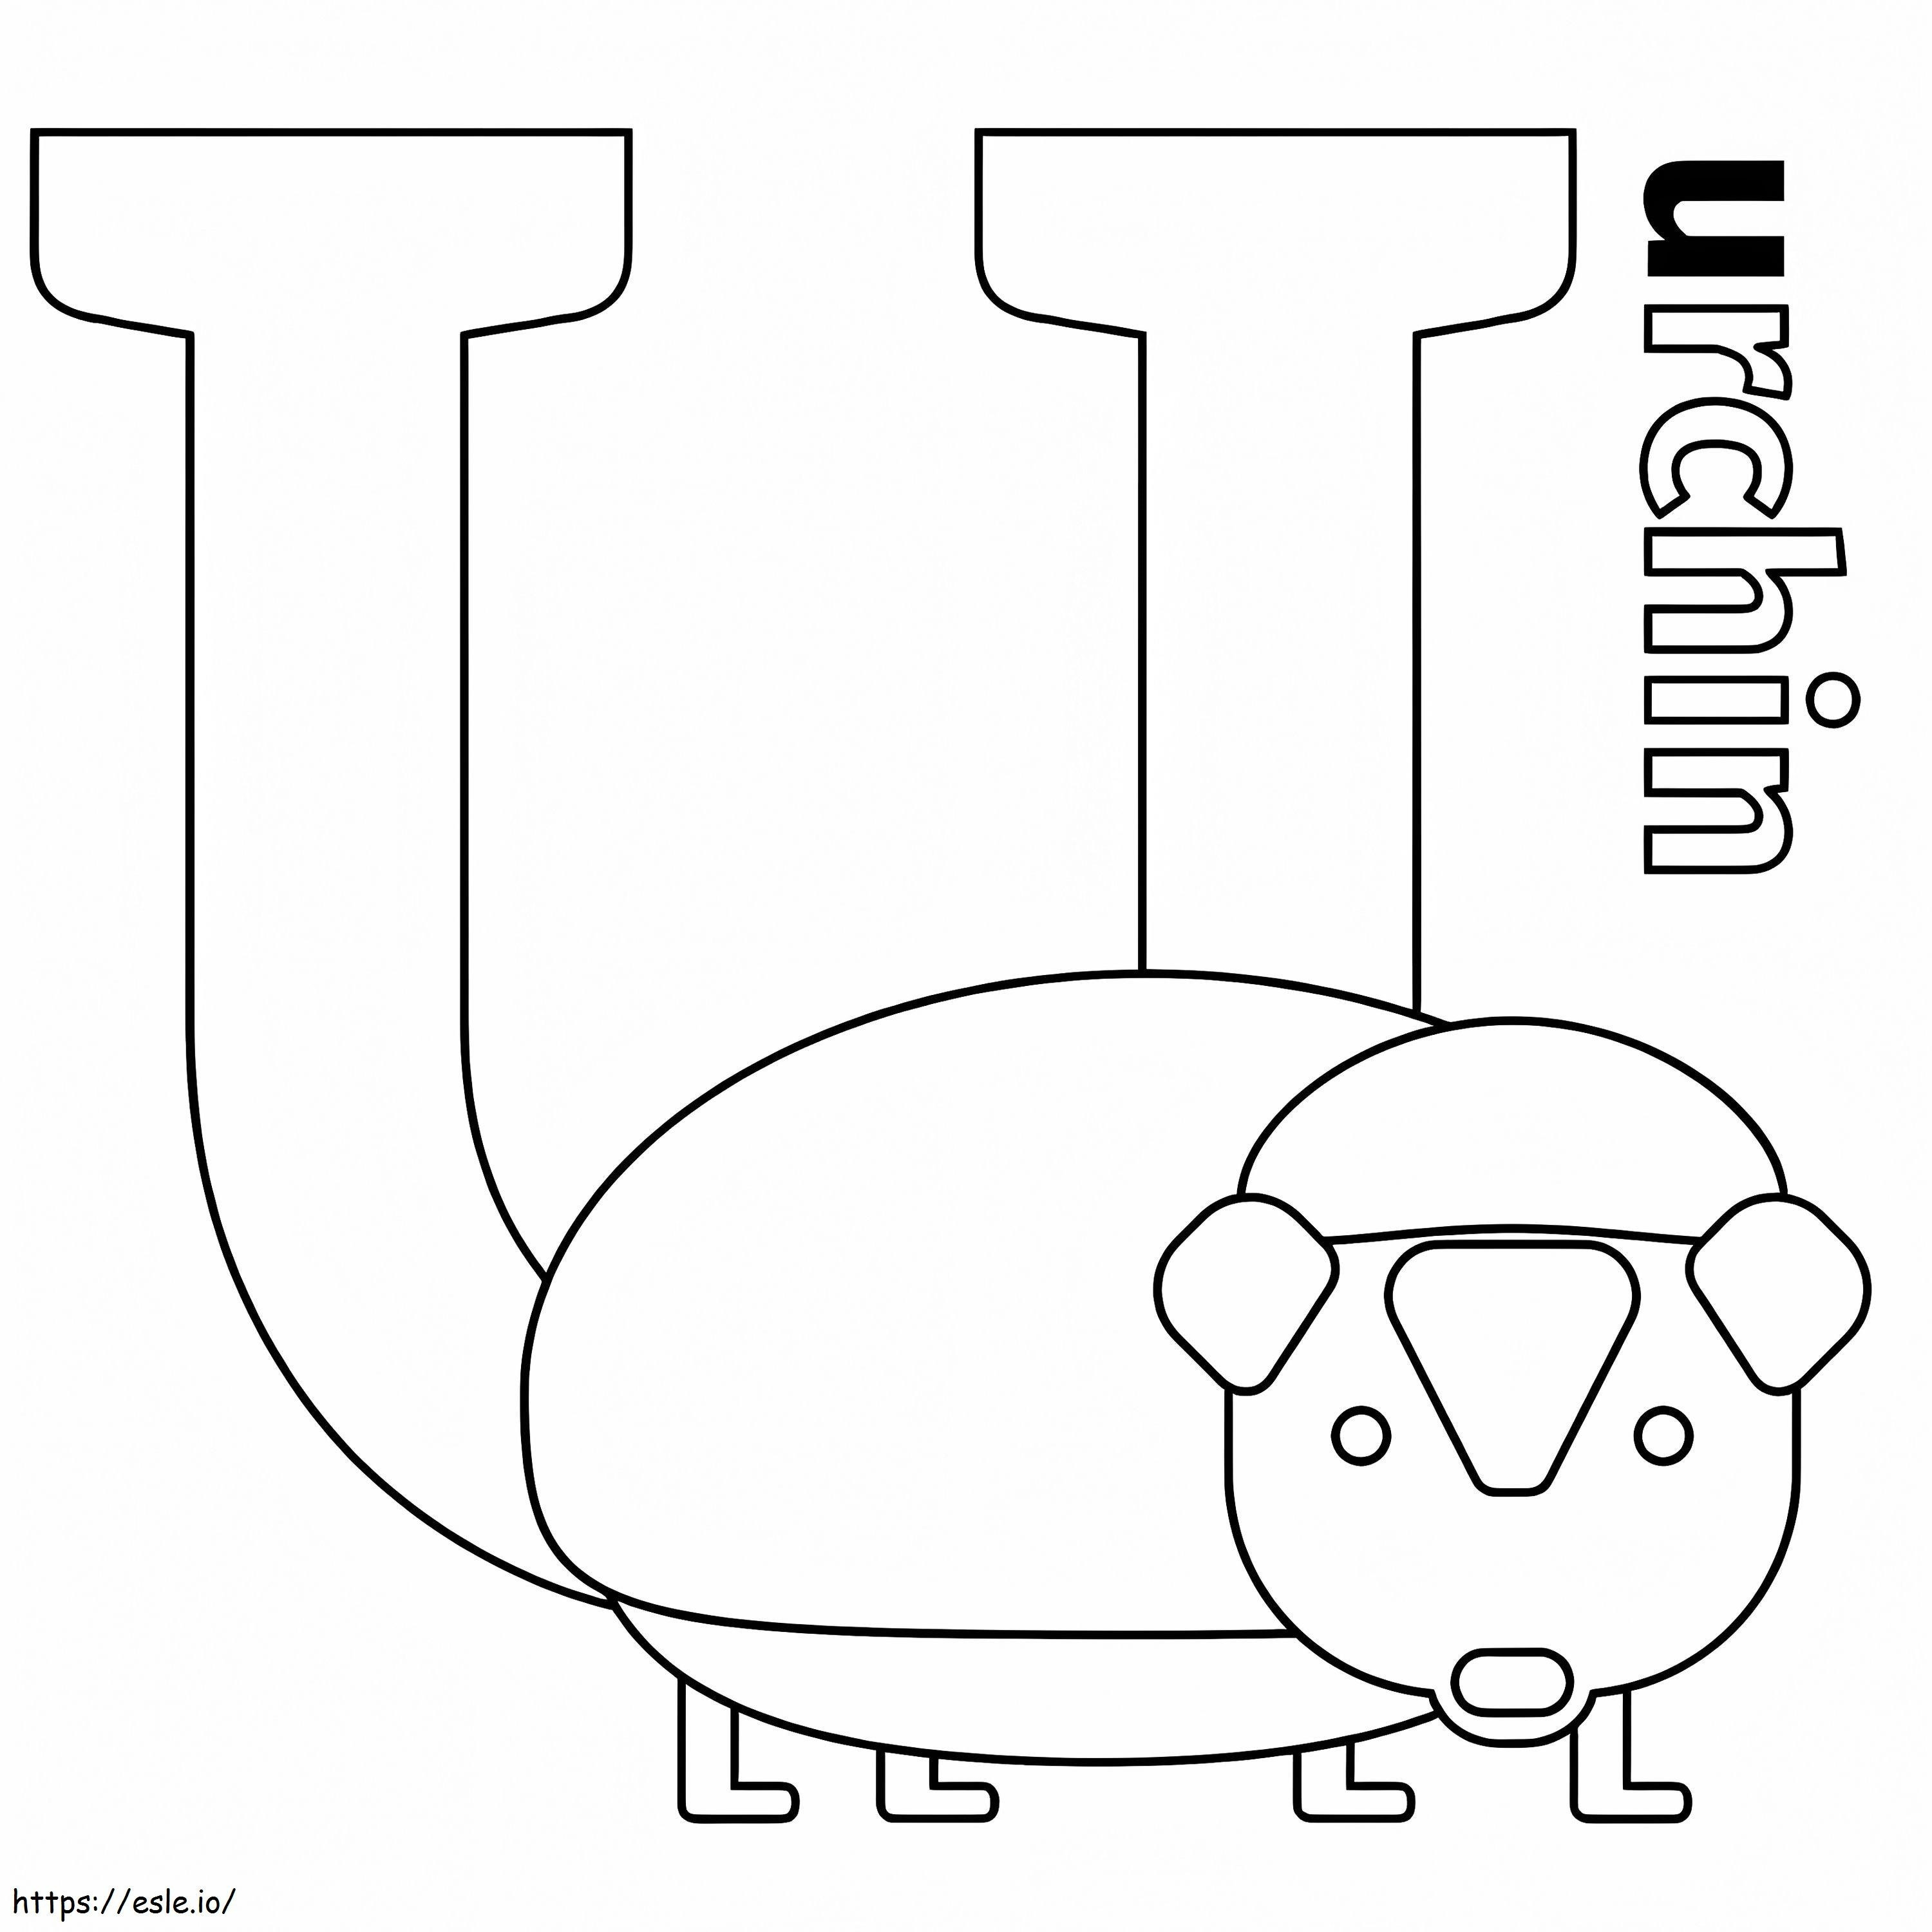 Urchin Letter U coloring page